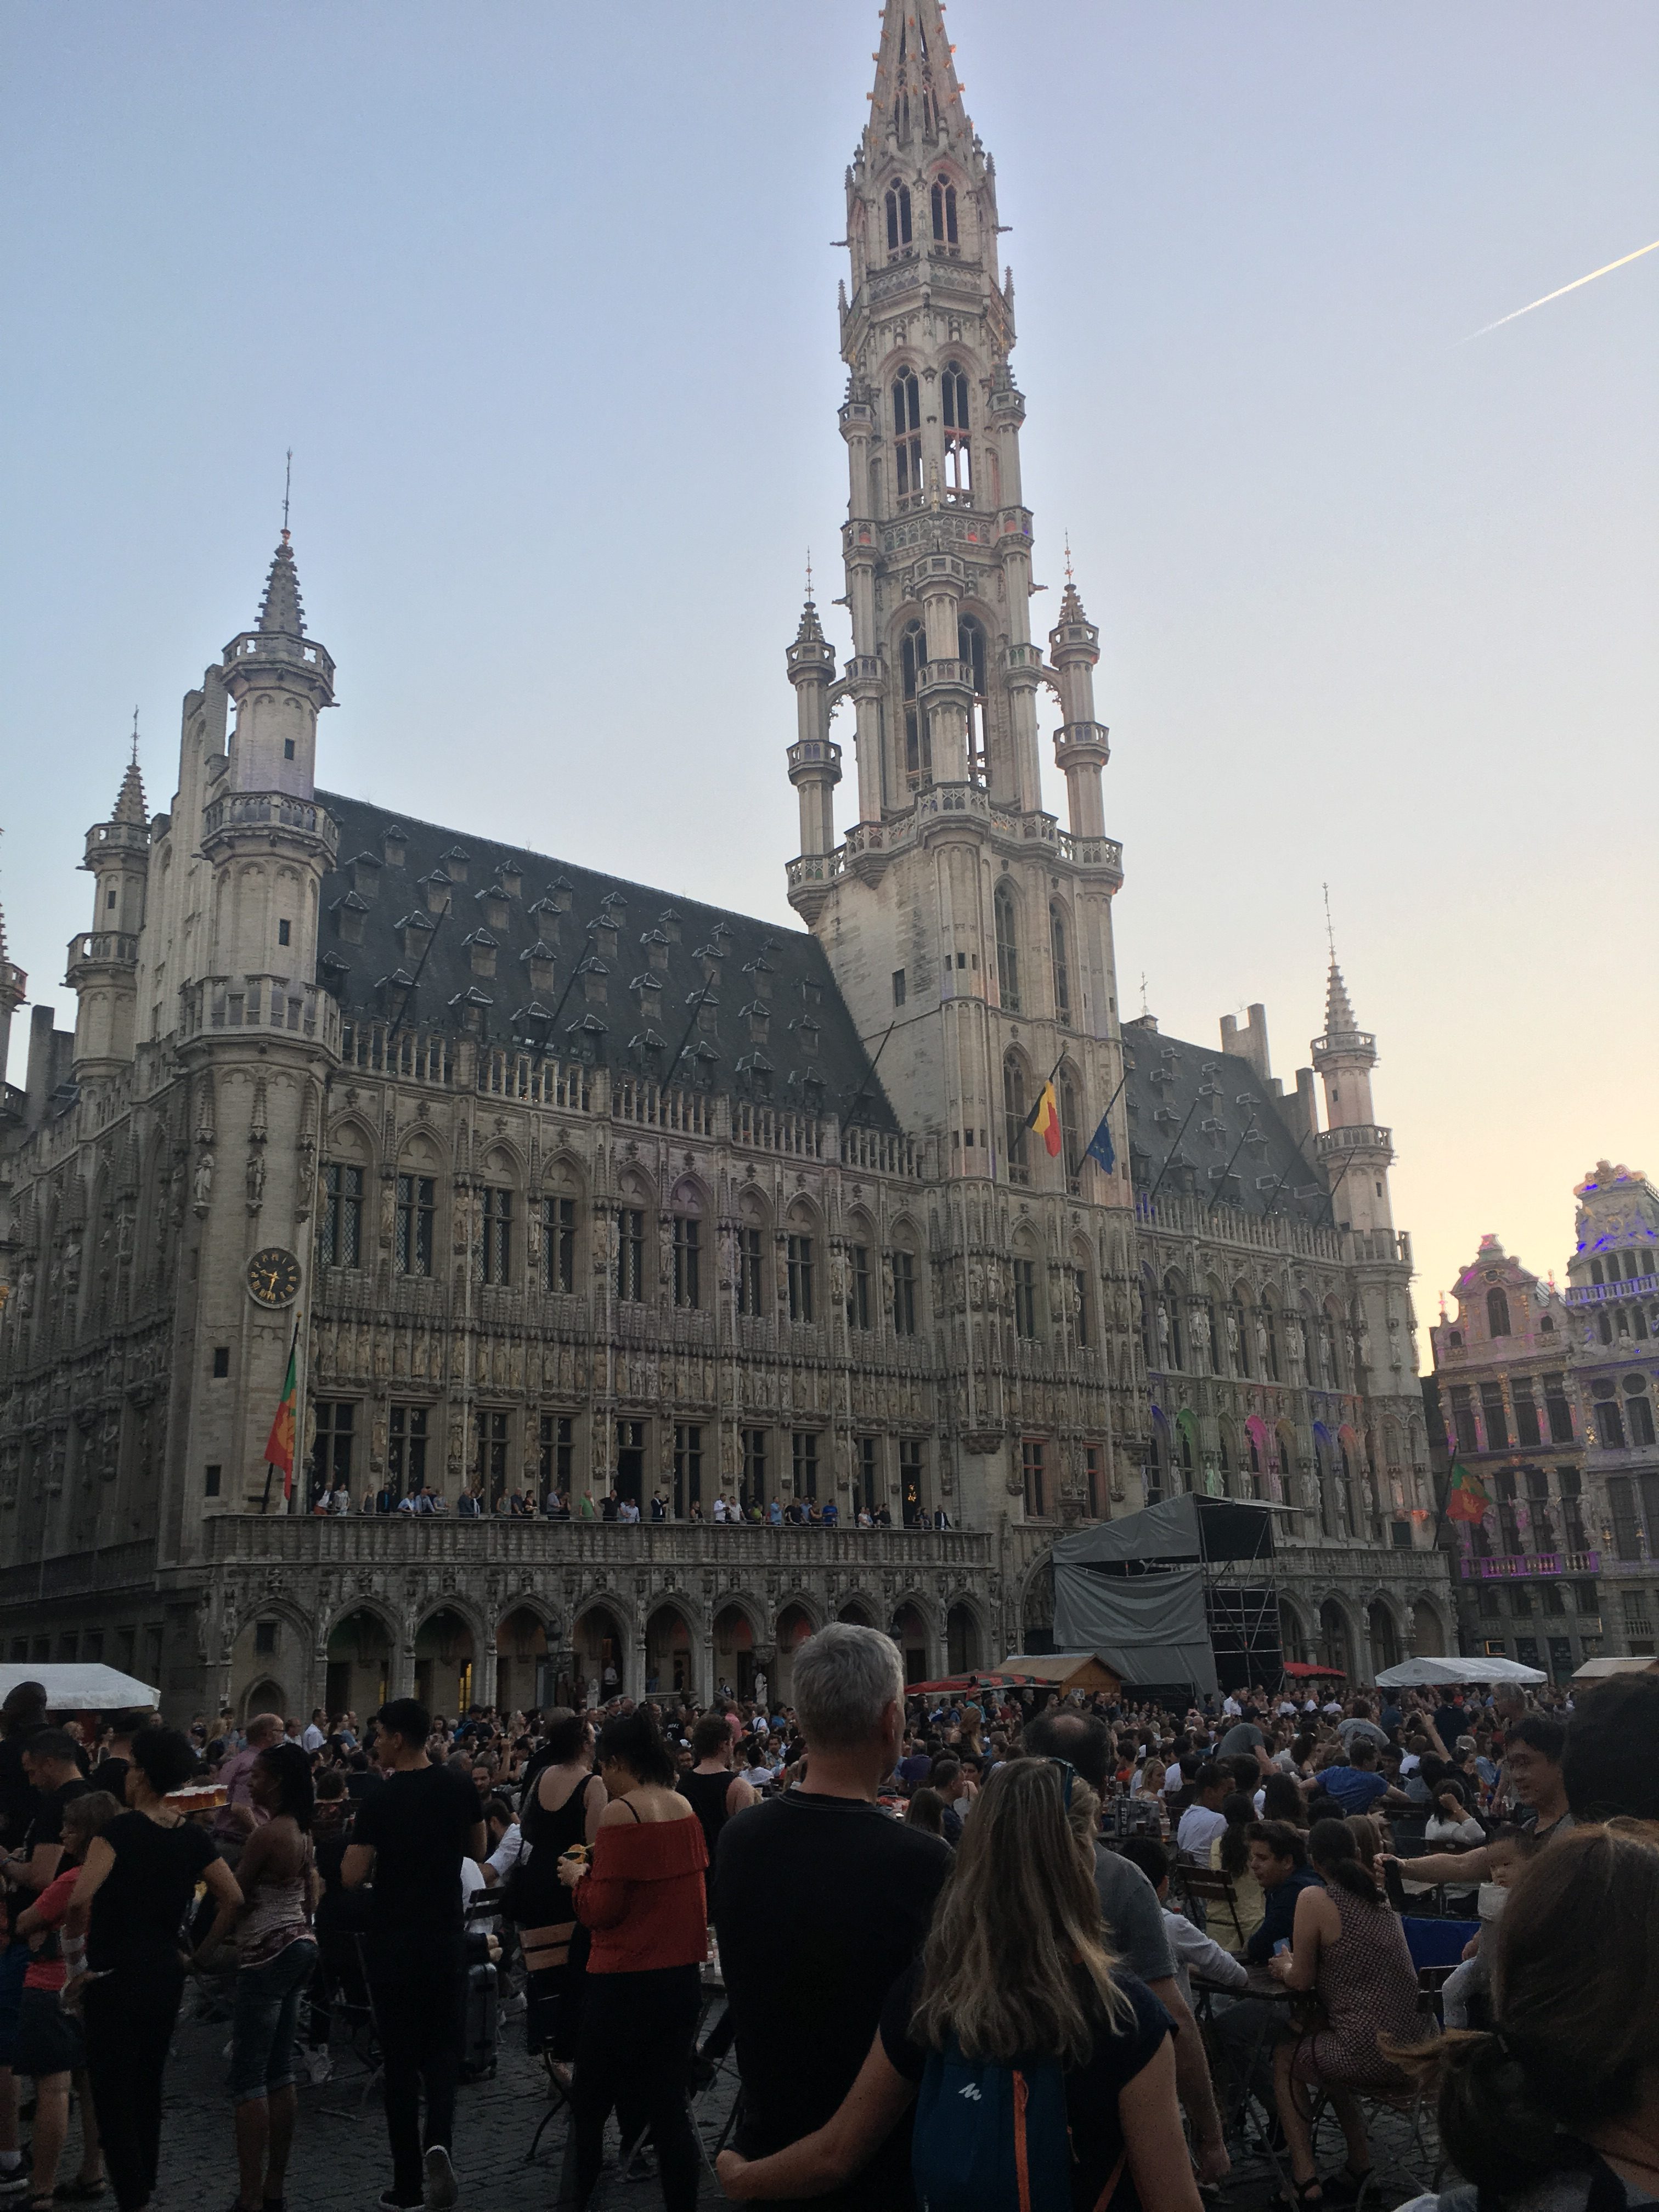 The Grand-Place in Brussels, Belgium.